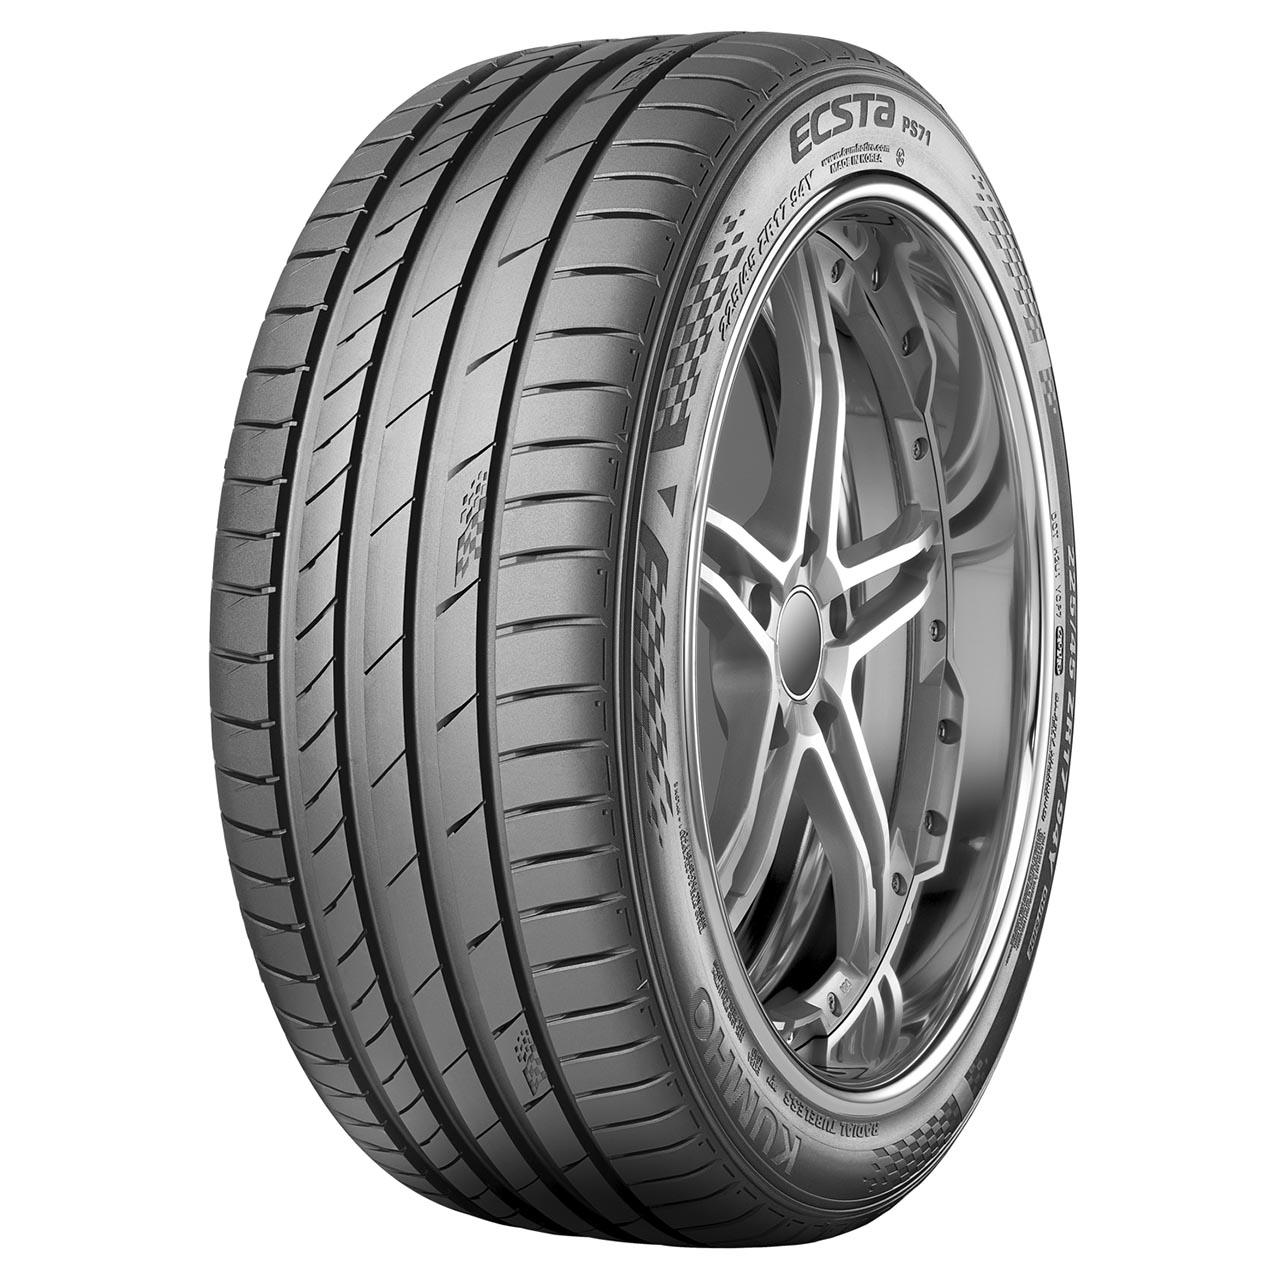 Kumho Ecsta PS71 245/40ZR18 93Y XRP